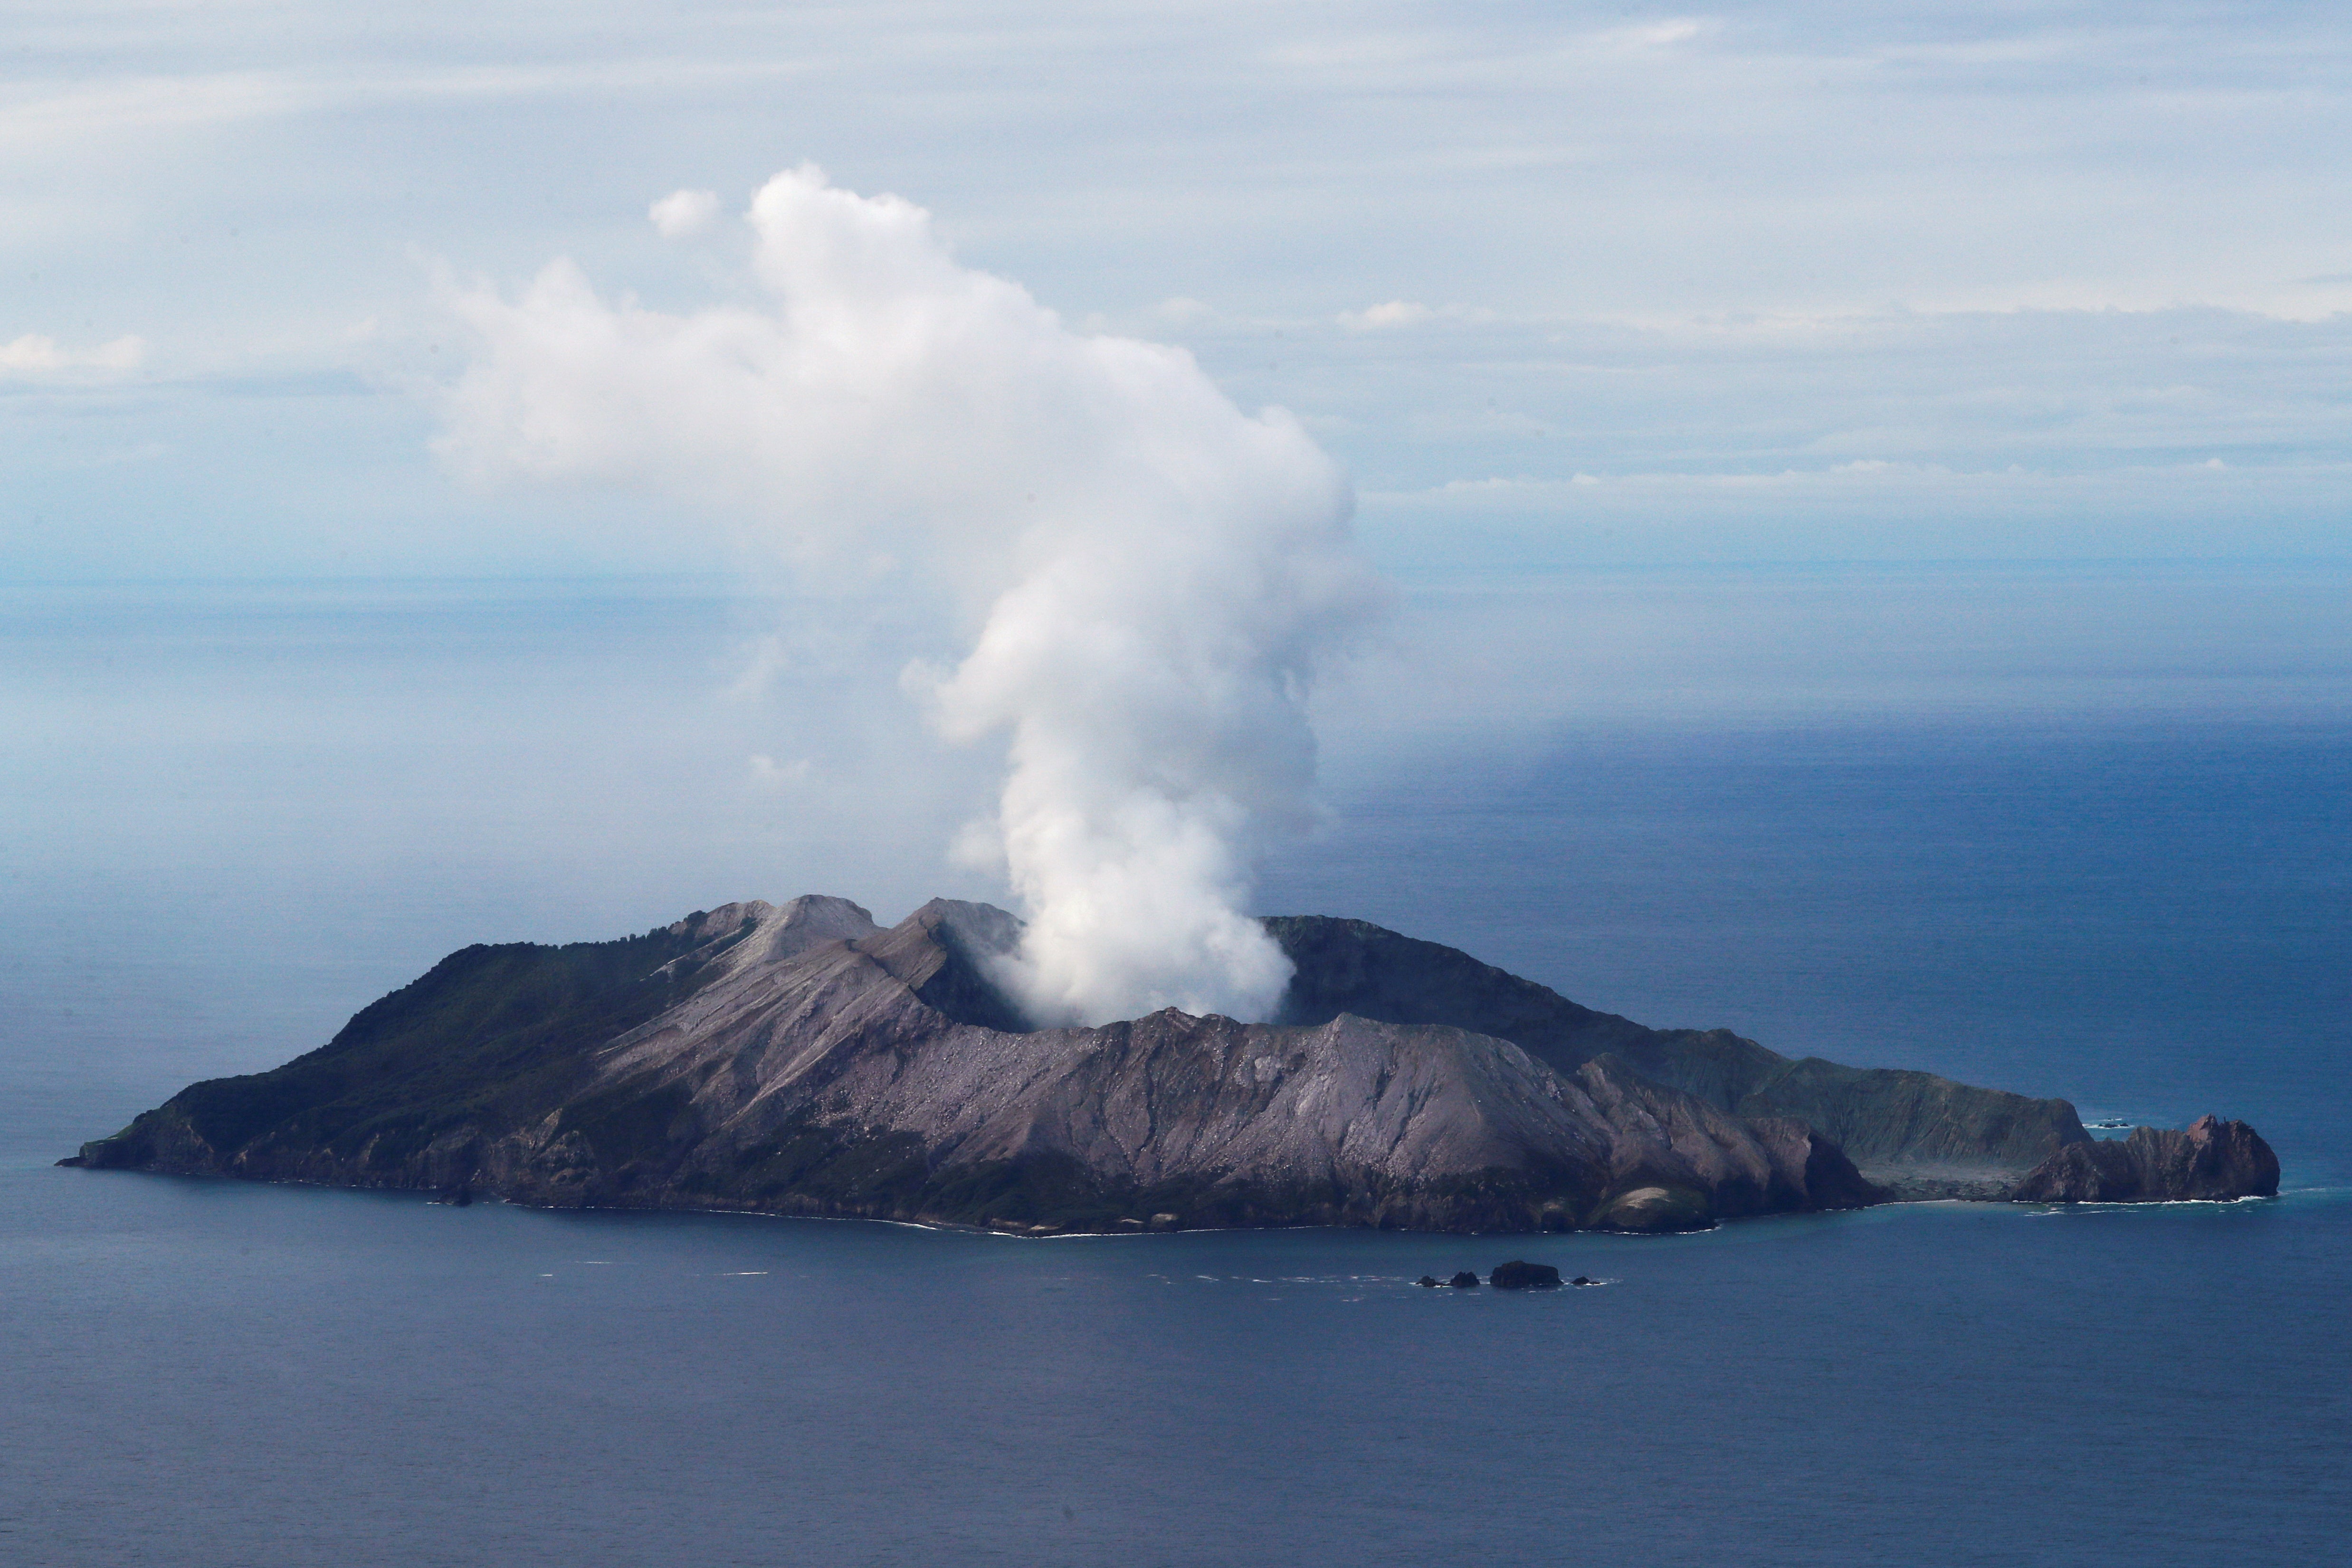 Whakaari, also known as the White Island volcano, has been active from 2011